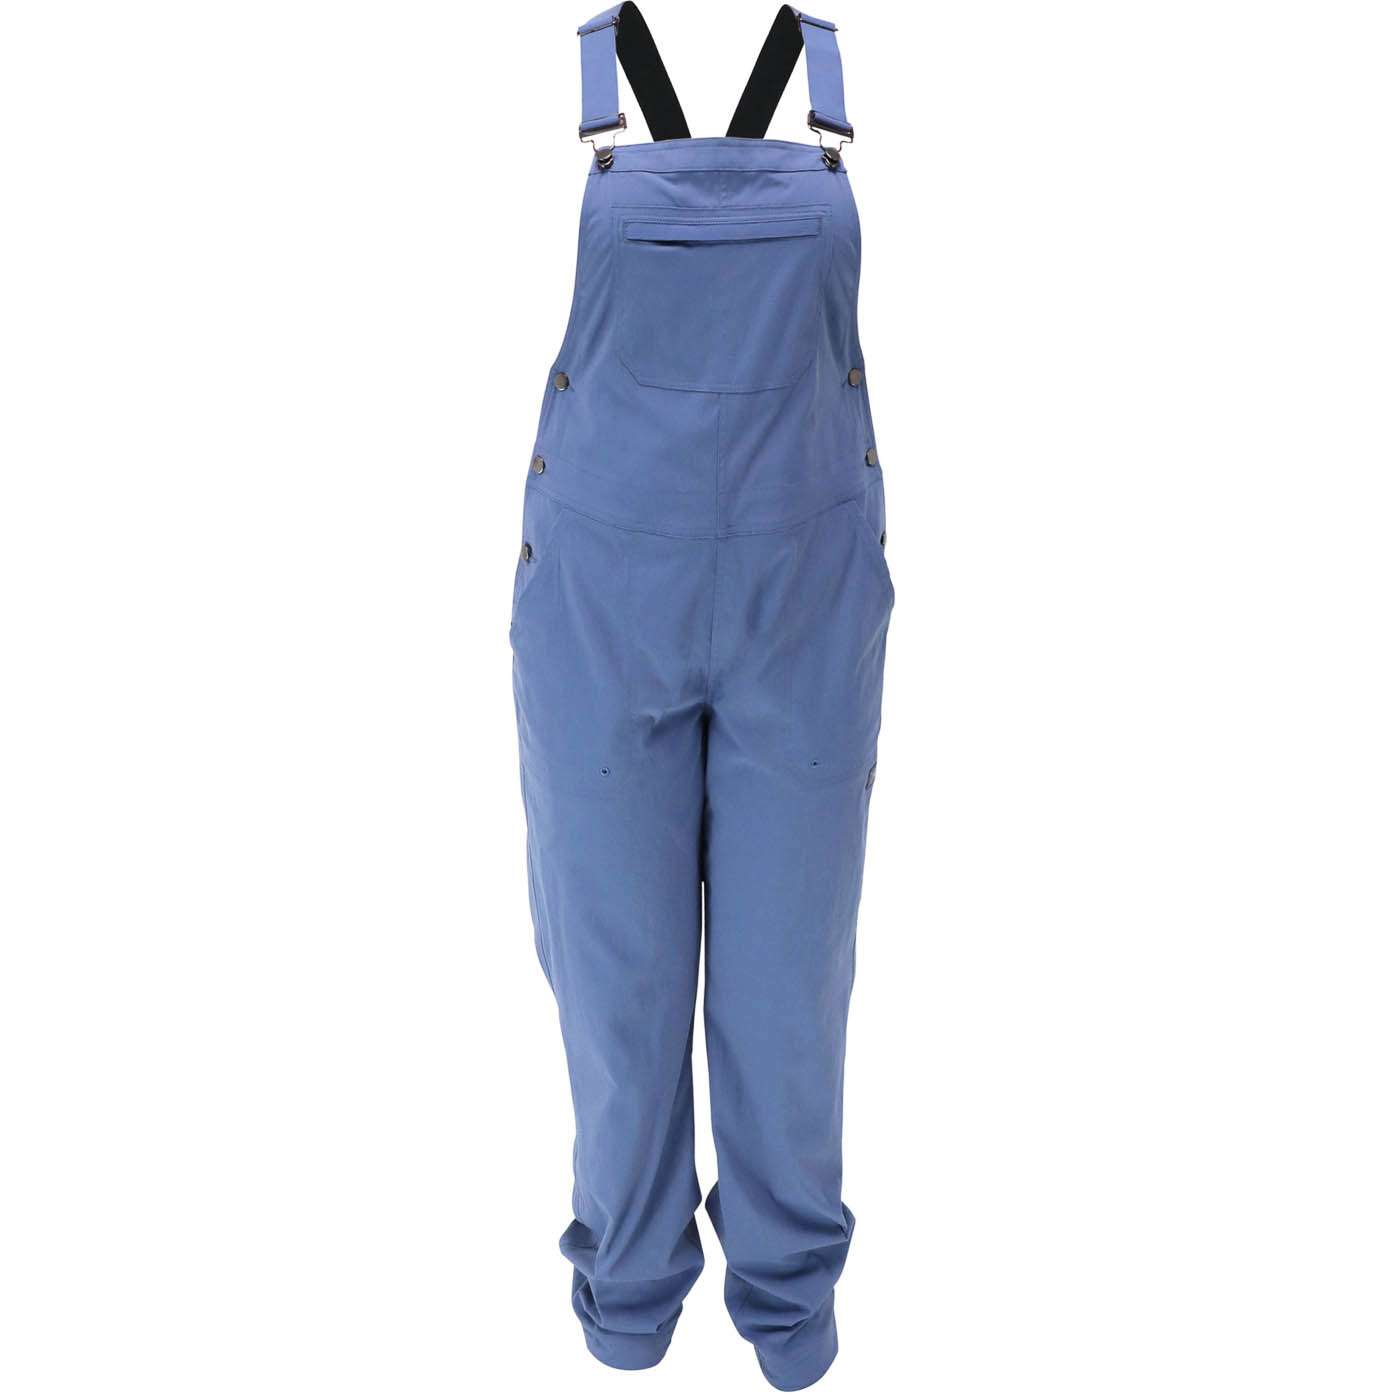 <p><strong>AFTCO Womenâs Field Overalls</strong></p><p>Built for surf or turf adventure, Field is constructed with a ripstop 94% nylon, 6% spandex 165gsm fabric. Field provides UPF 40 sun protection, DWR stain resistance, 4-way stretch, elastic faced adjustable straps, zippered chest pocket, front hand and back pockets, Block Tapey cell phone pocket, hem adjustment, demask woven label, and inseam 30.5